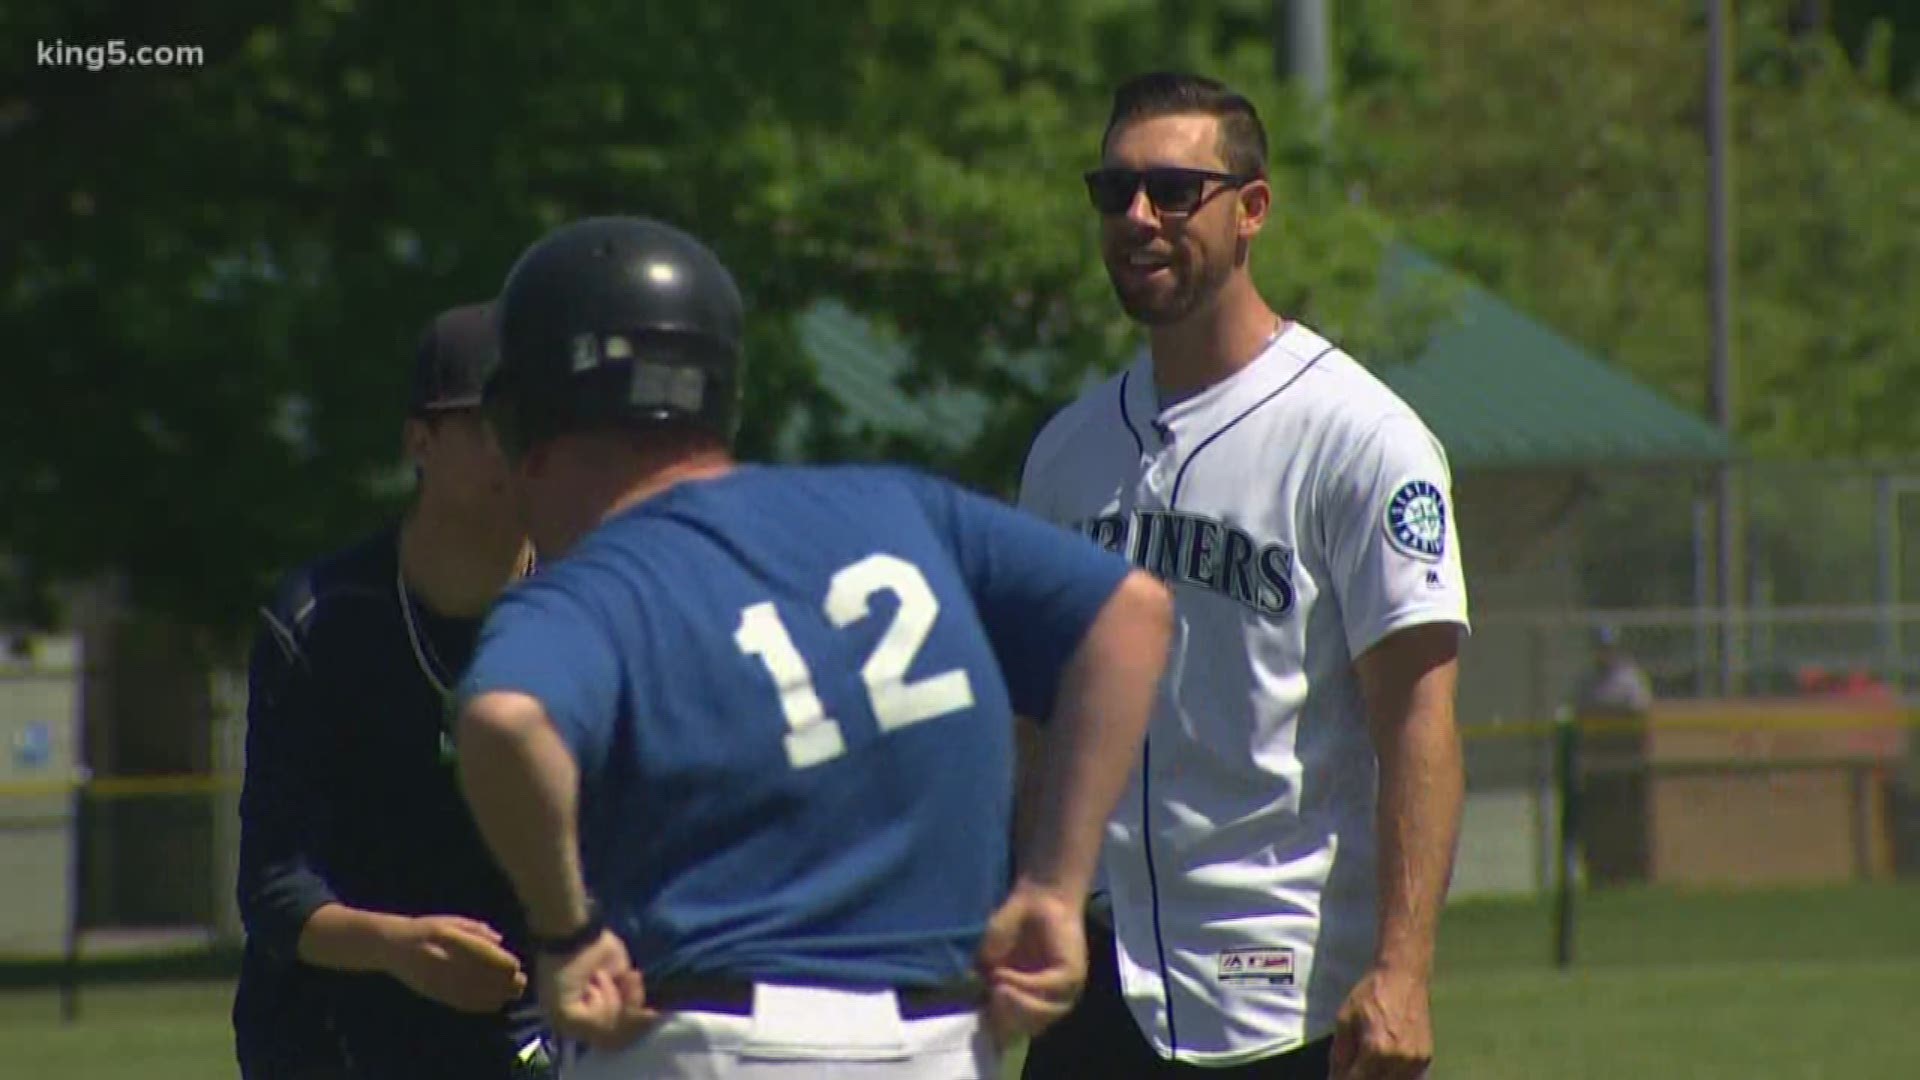 Mariners players share love of baseball with Challengers little league